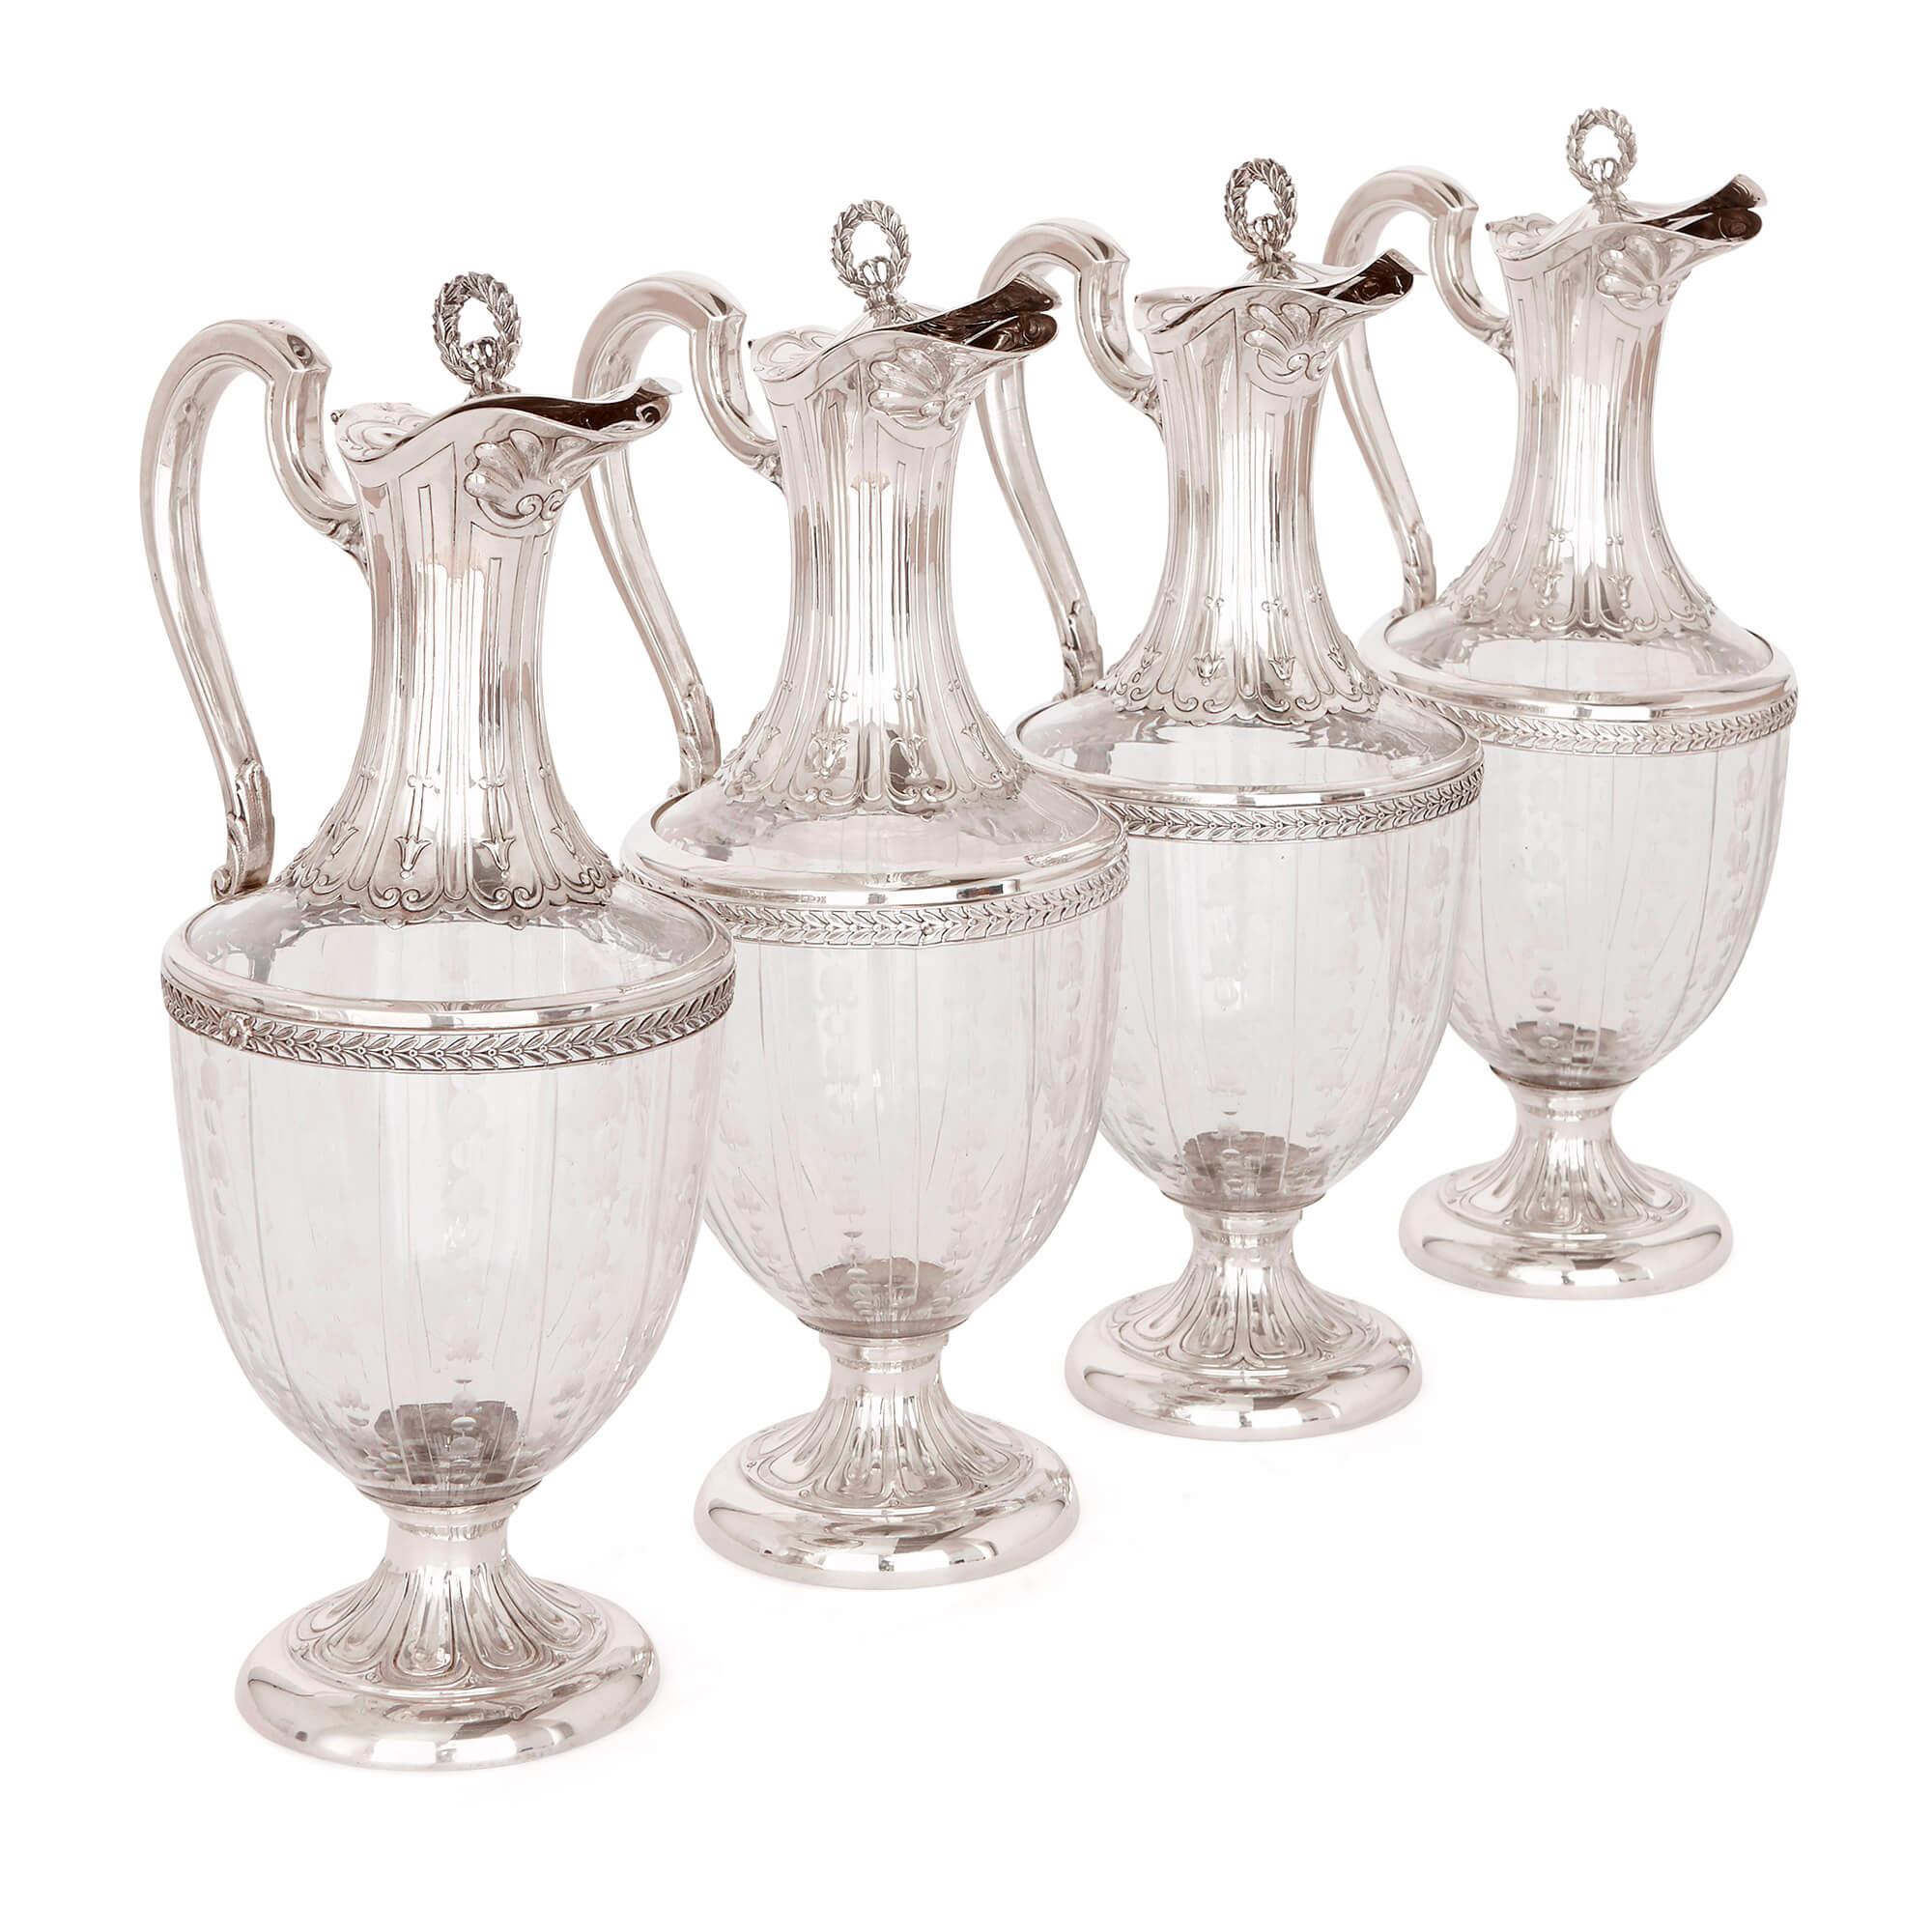 Four Belle Époque Silver and Glass Decanters by Beunke